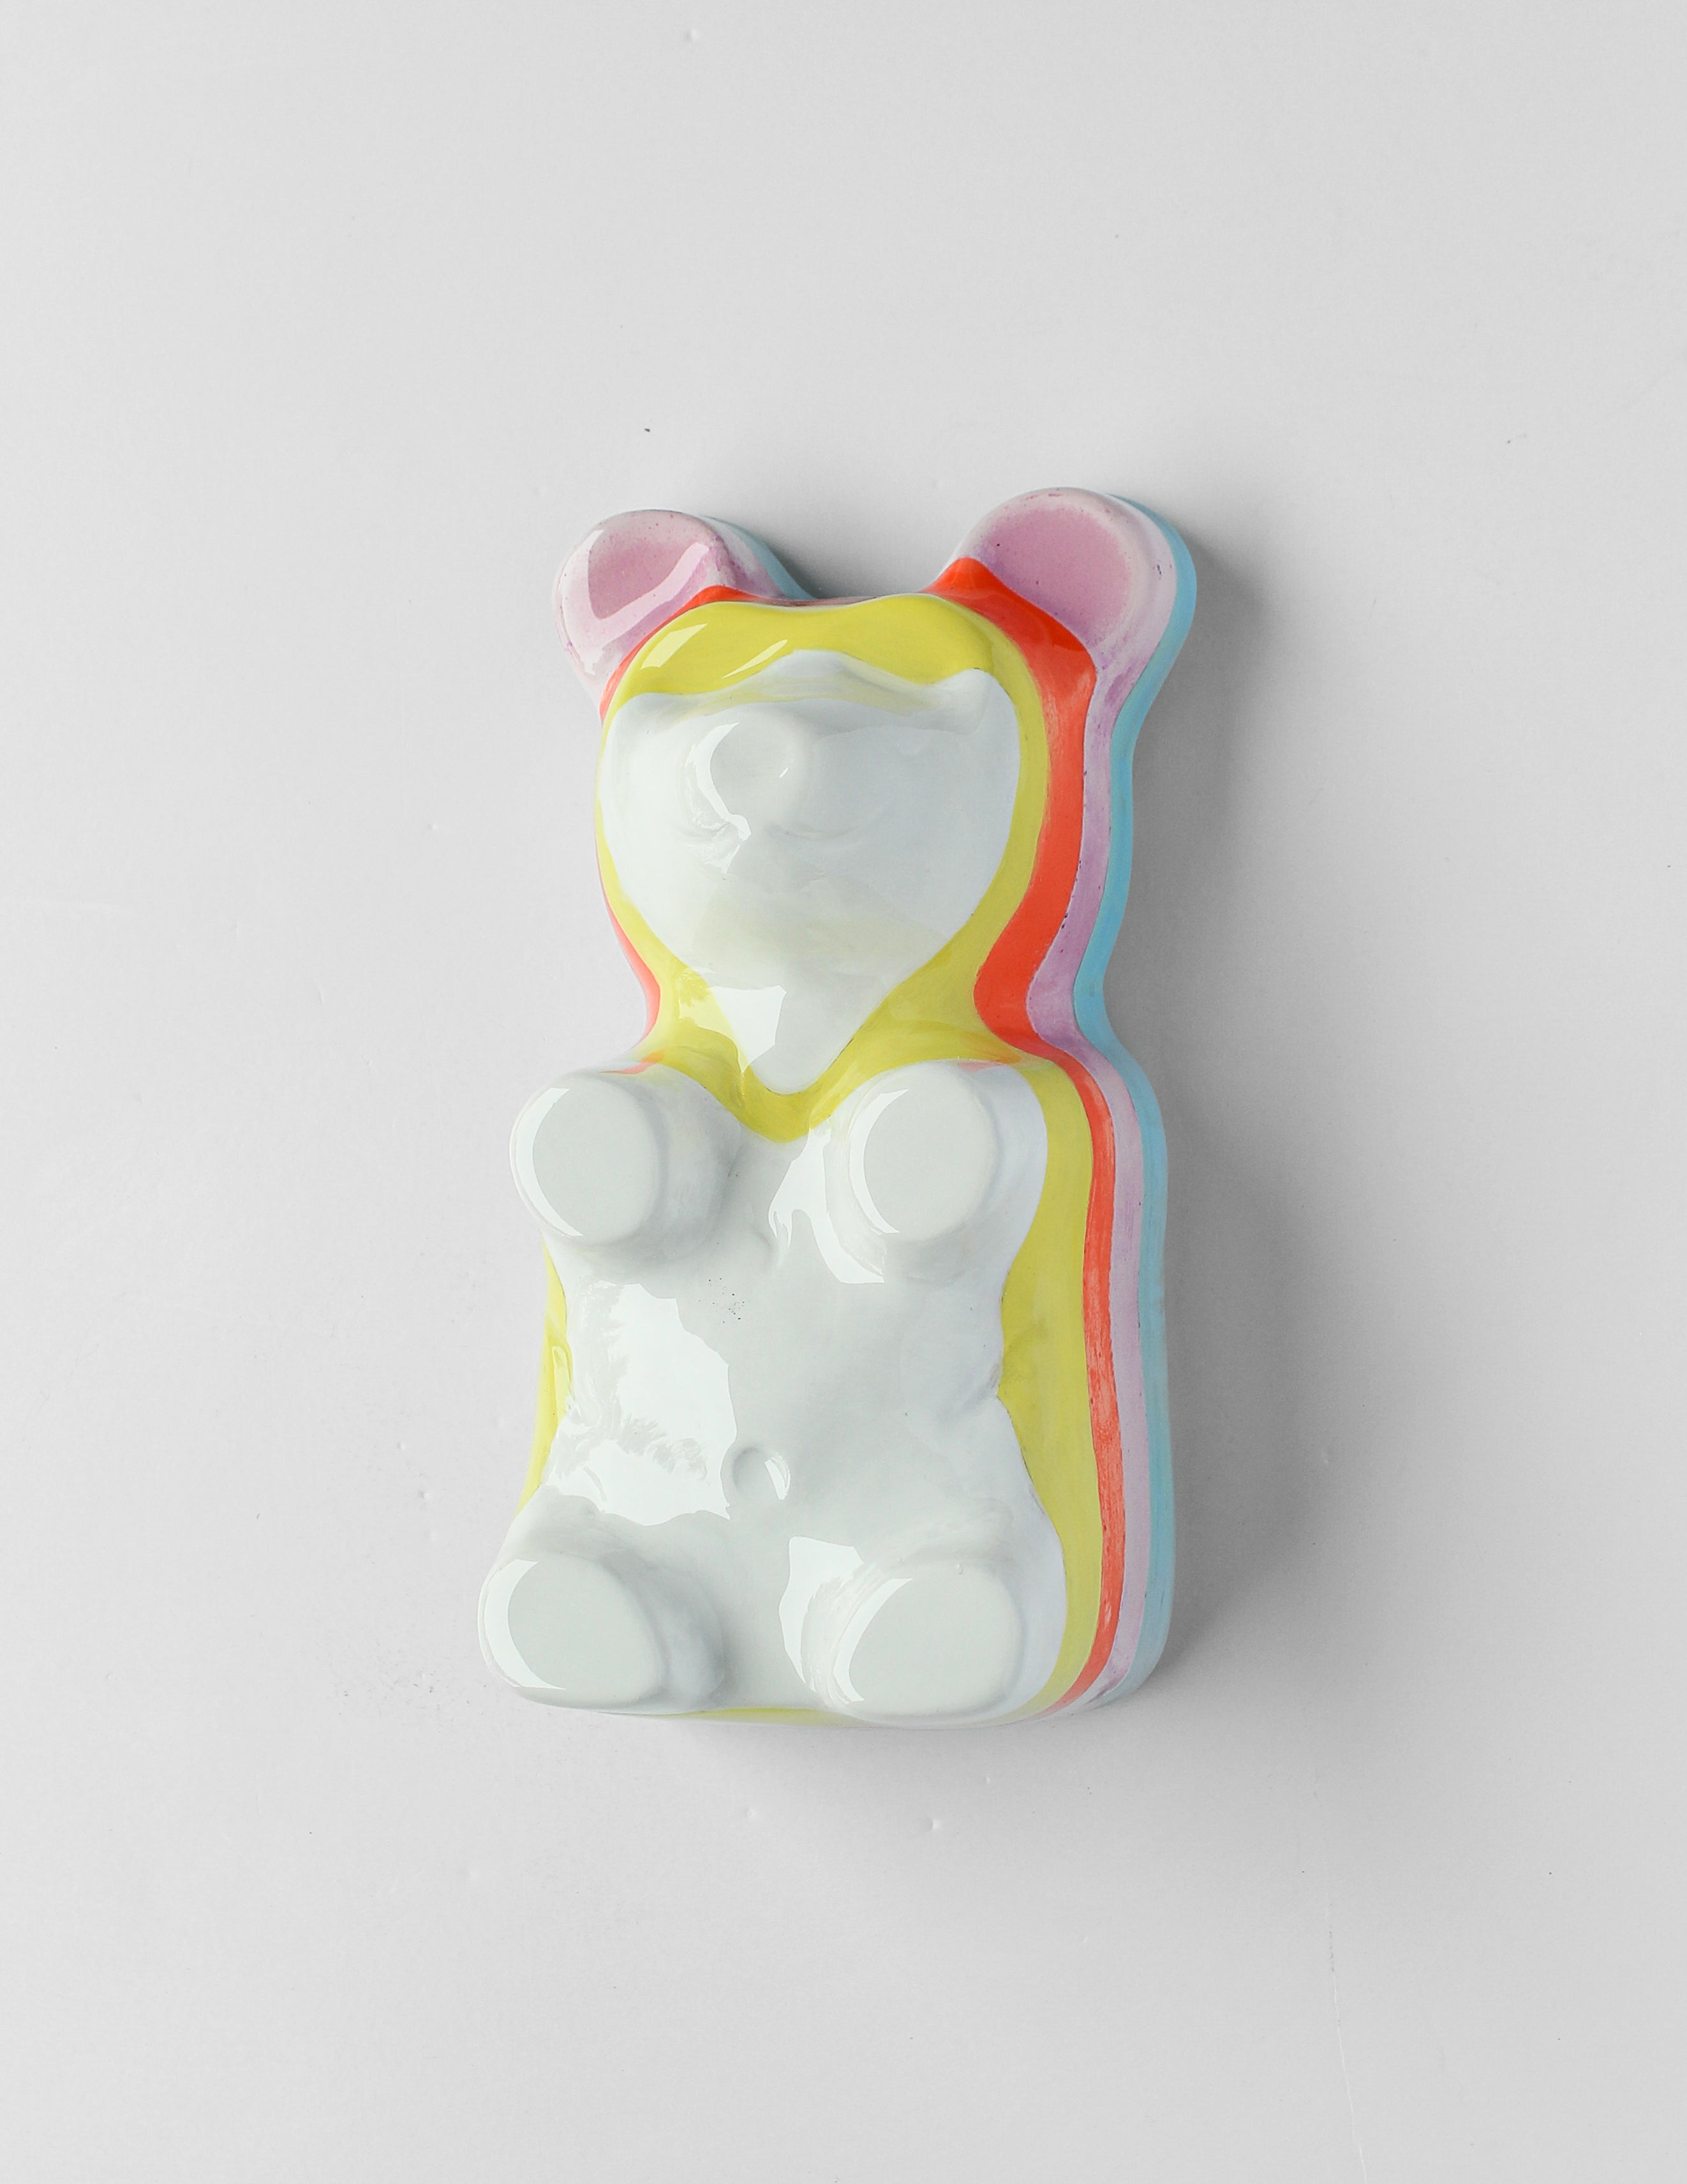 'GUMMY #4' - Pigmented Cement, Resin, Acrylic